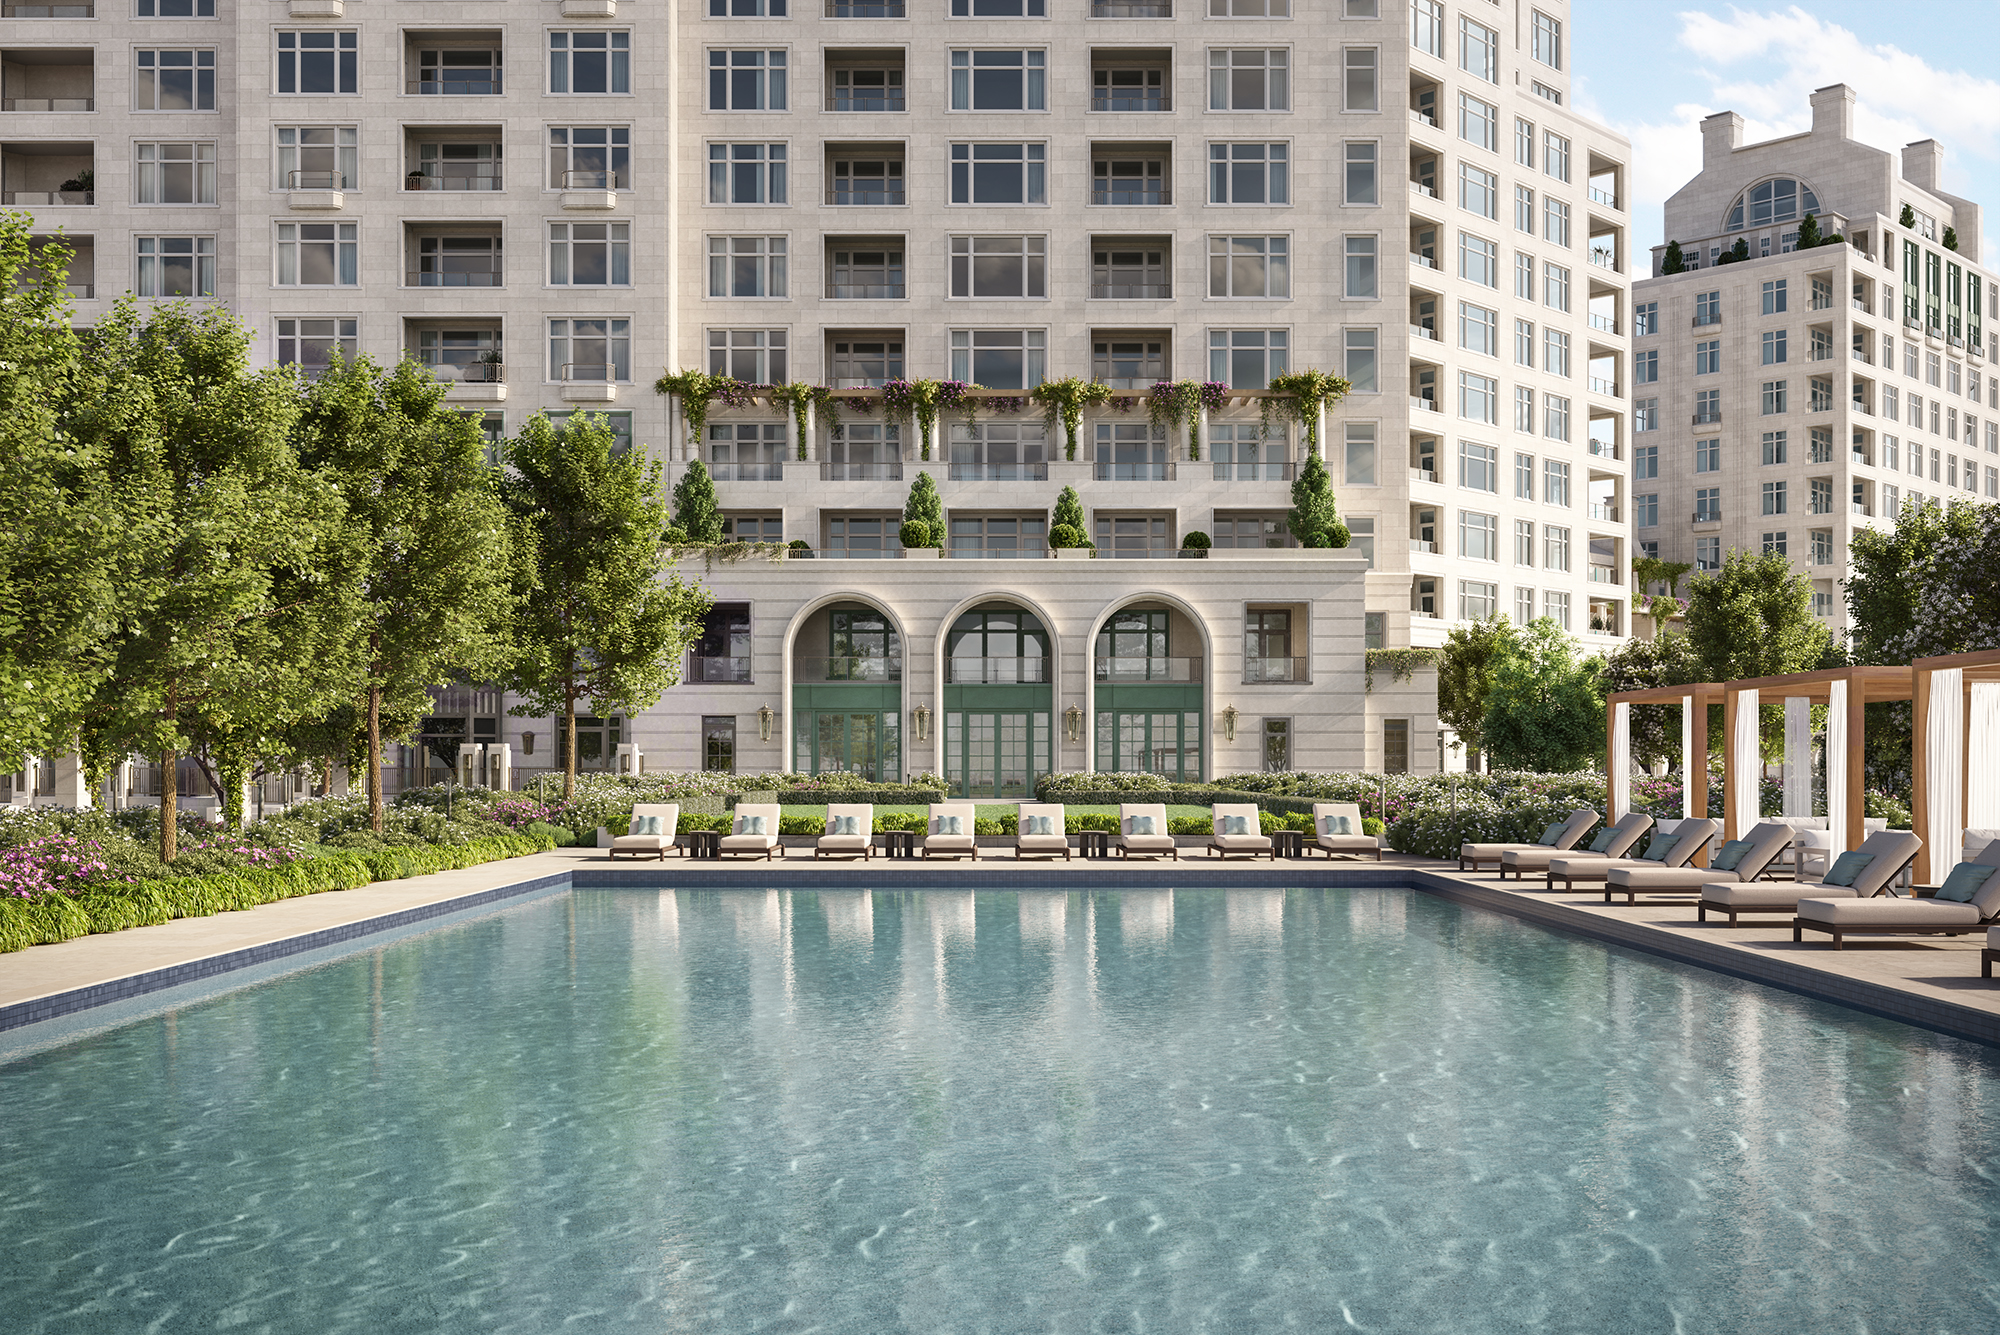 Ritz-Carlton Residences The Woodlands, Robert A.M. Stern Architects